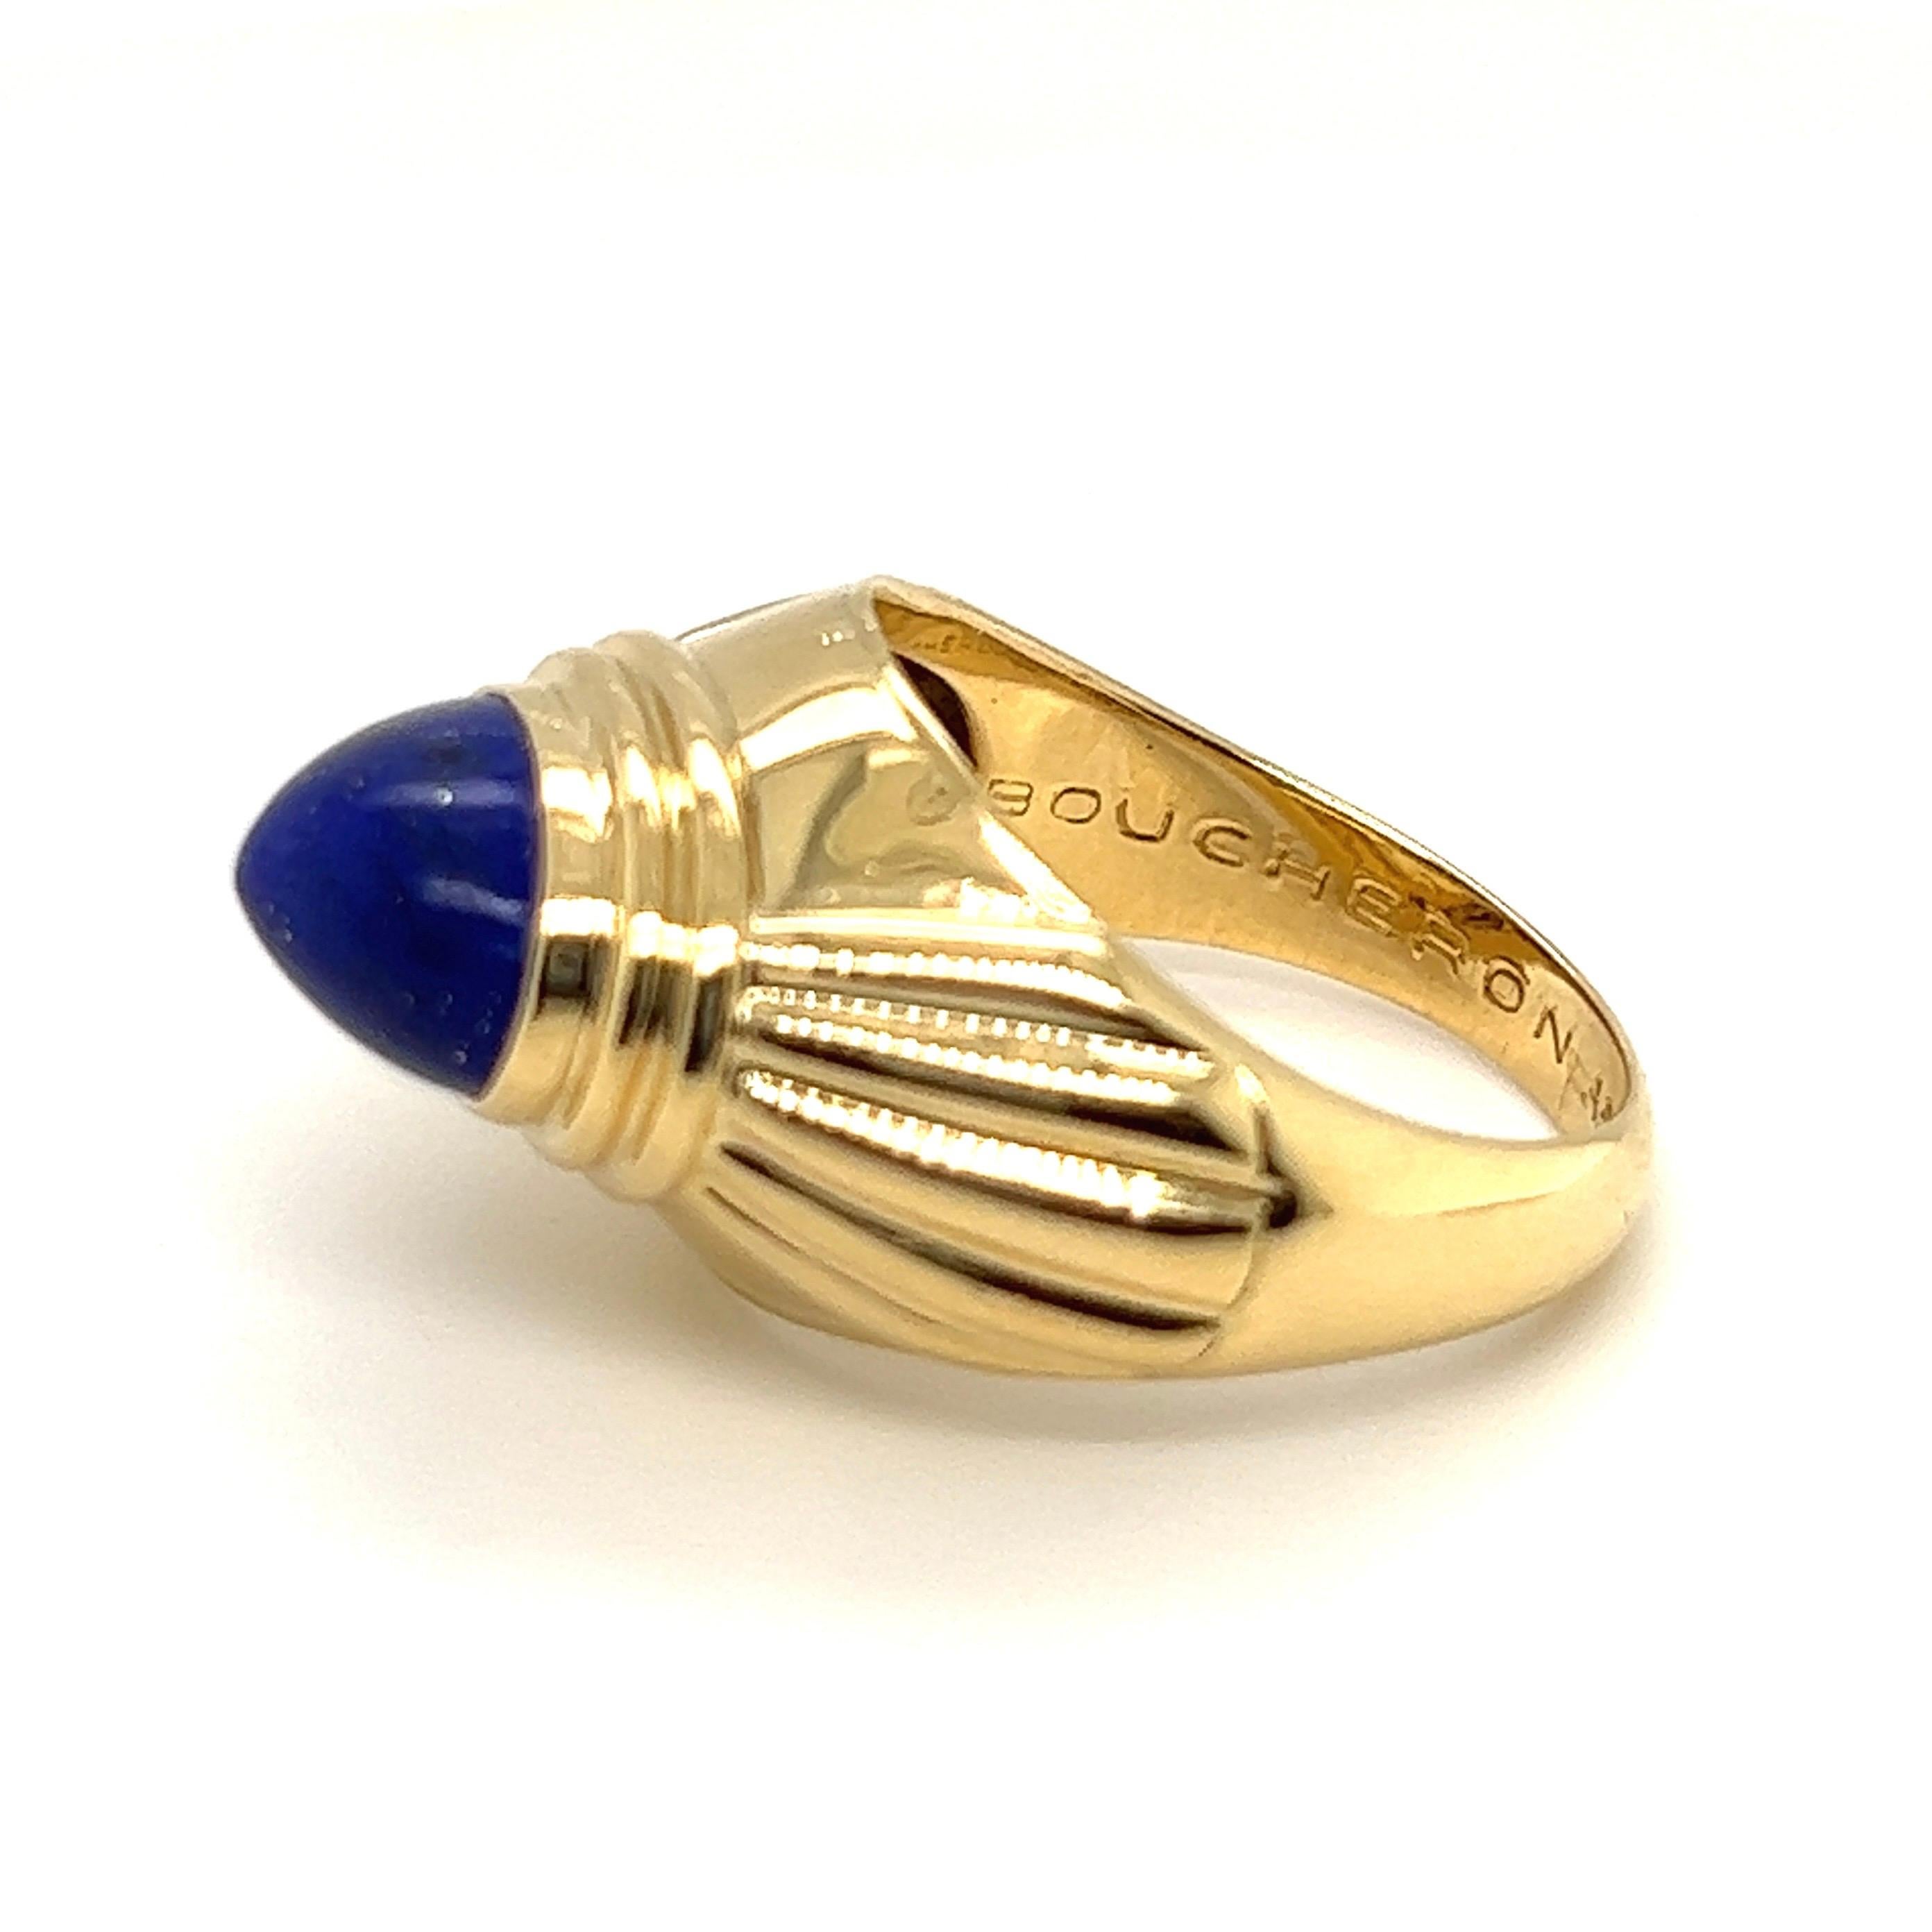 Classic 18 karat yellow gold and lapis lazuli Jaipur ring by renowned French jewelry house Boucheron.
Of fluted design, this high domed ring is crafted in 18 karat yellow gold and set with a lapis lazuli cabochon. Jaipur is one of Boucheron's most